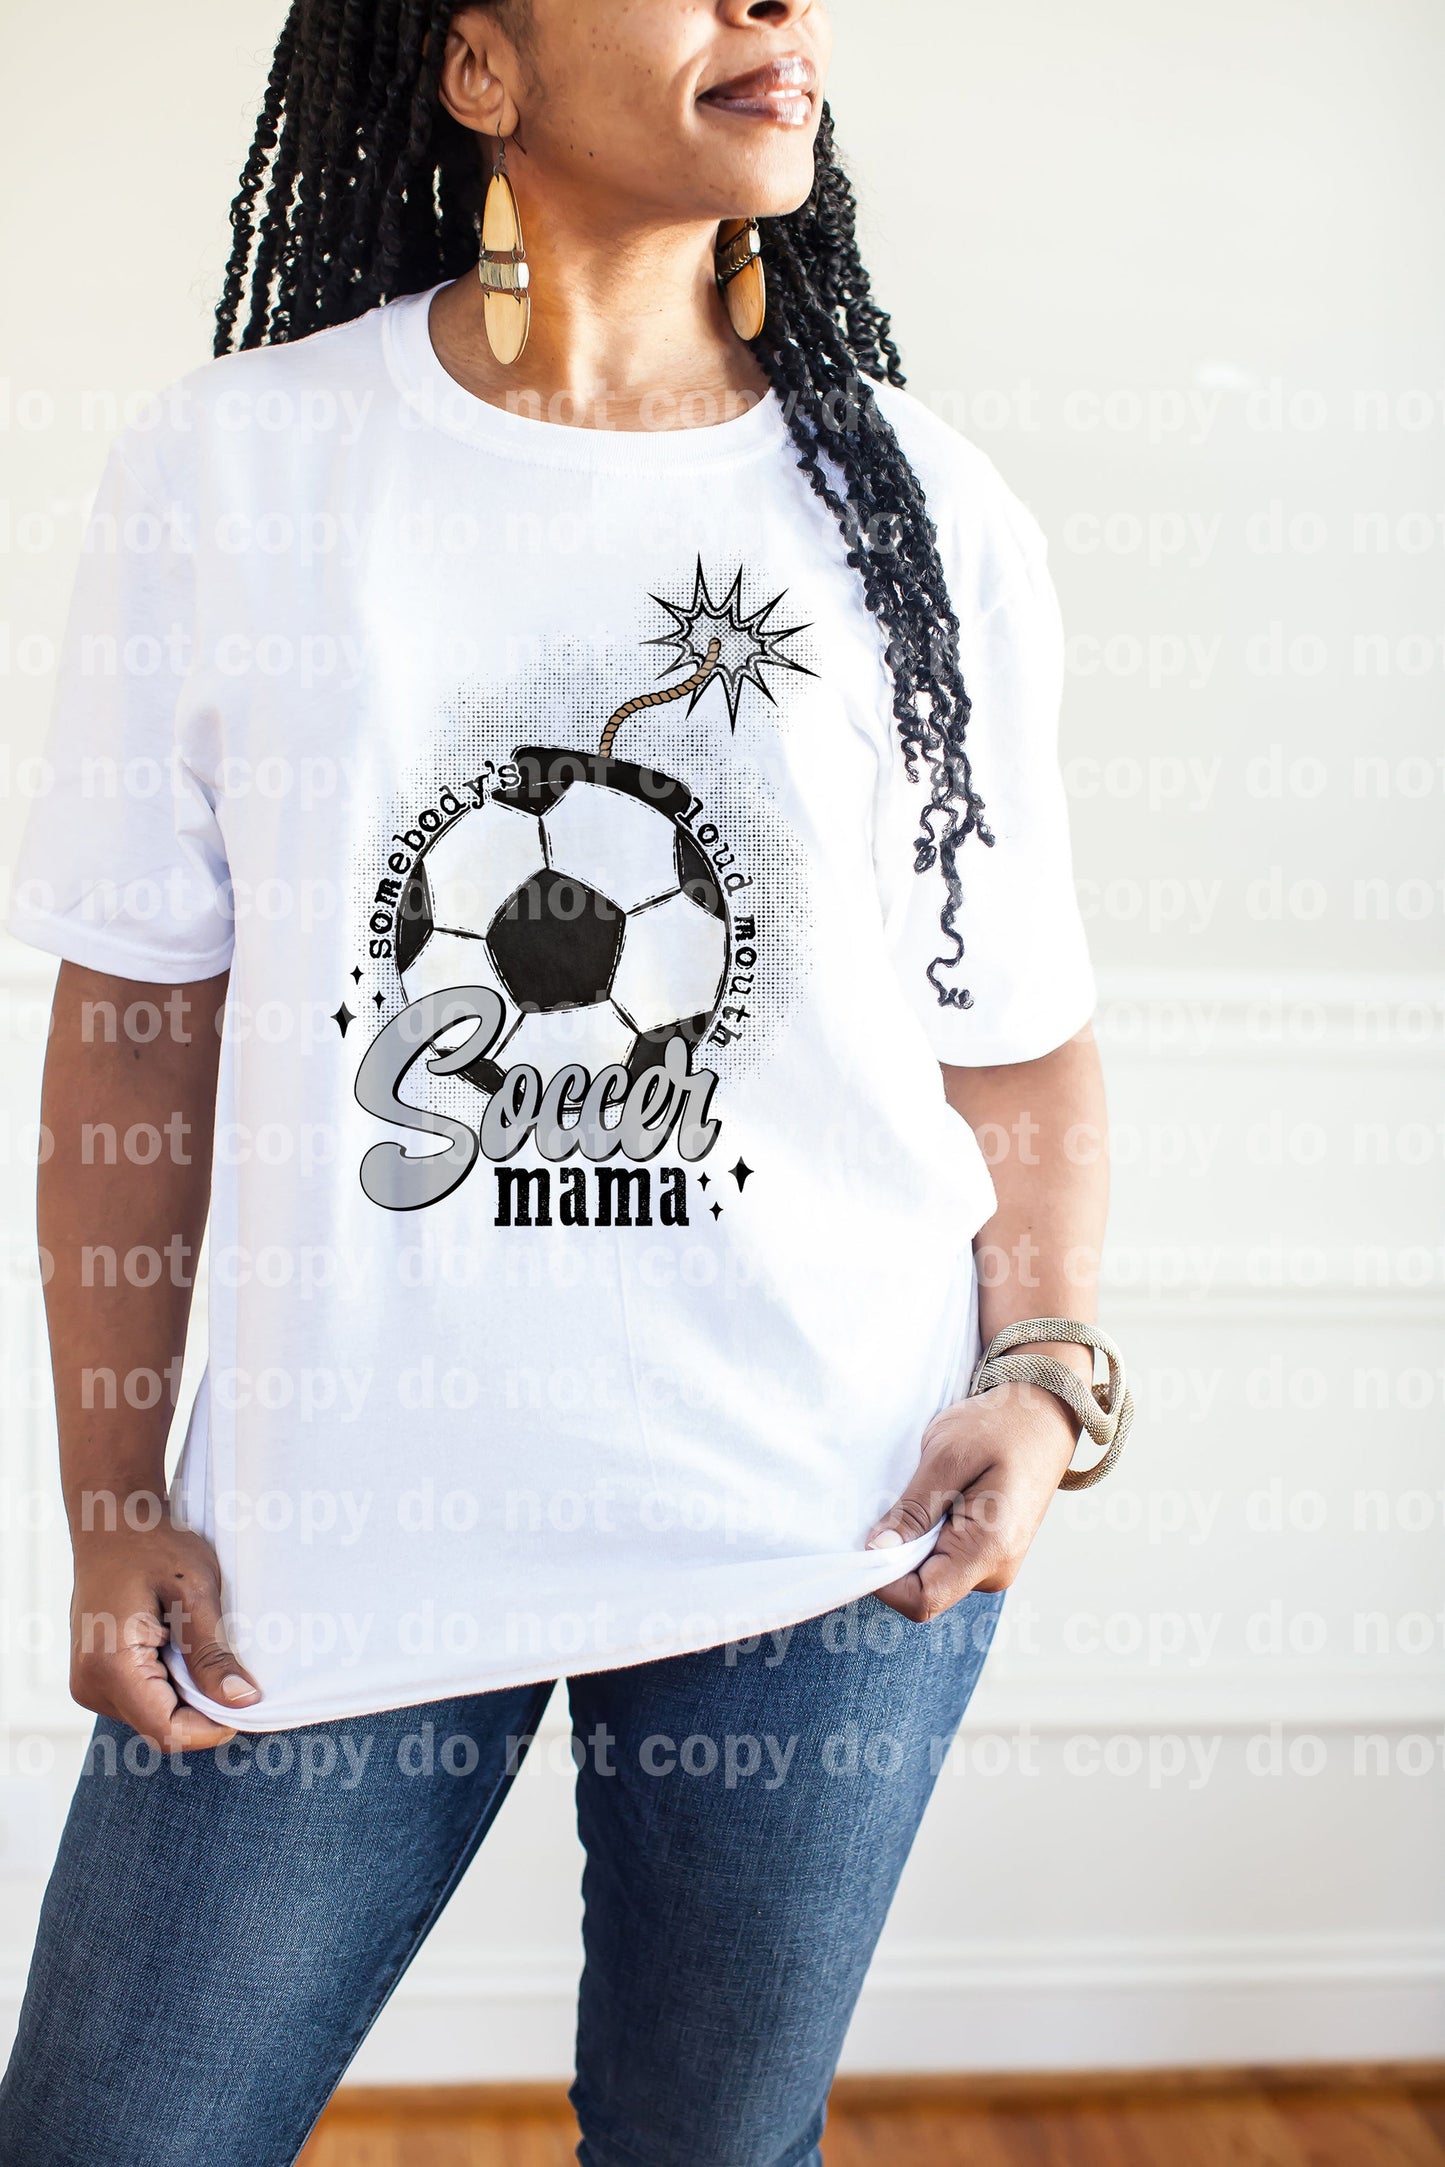 Somebody's Loud Mouth Soccer Mama Dream Print or Sublimation Print